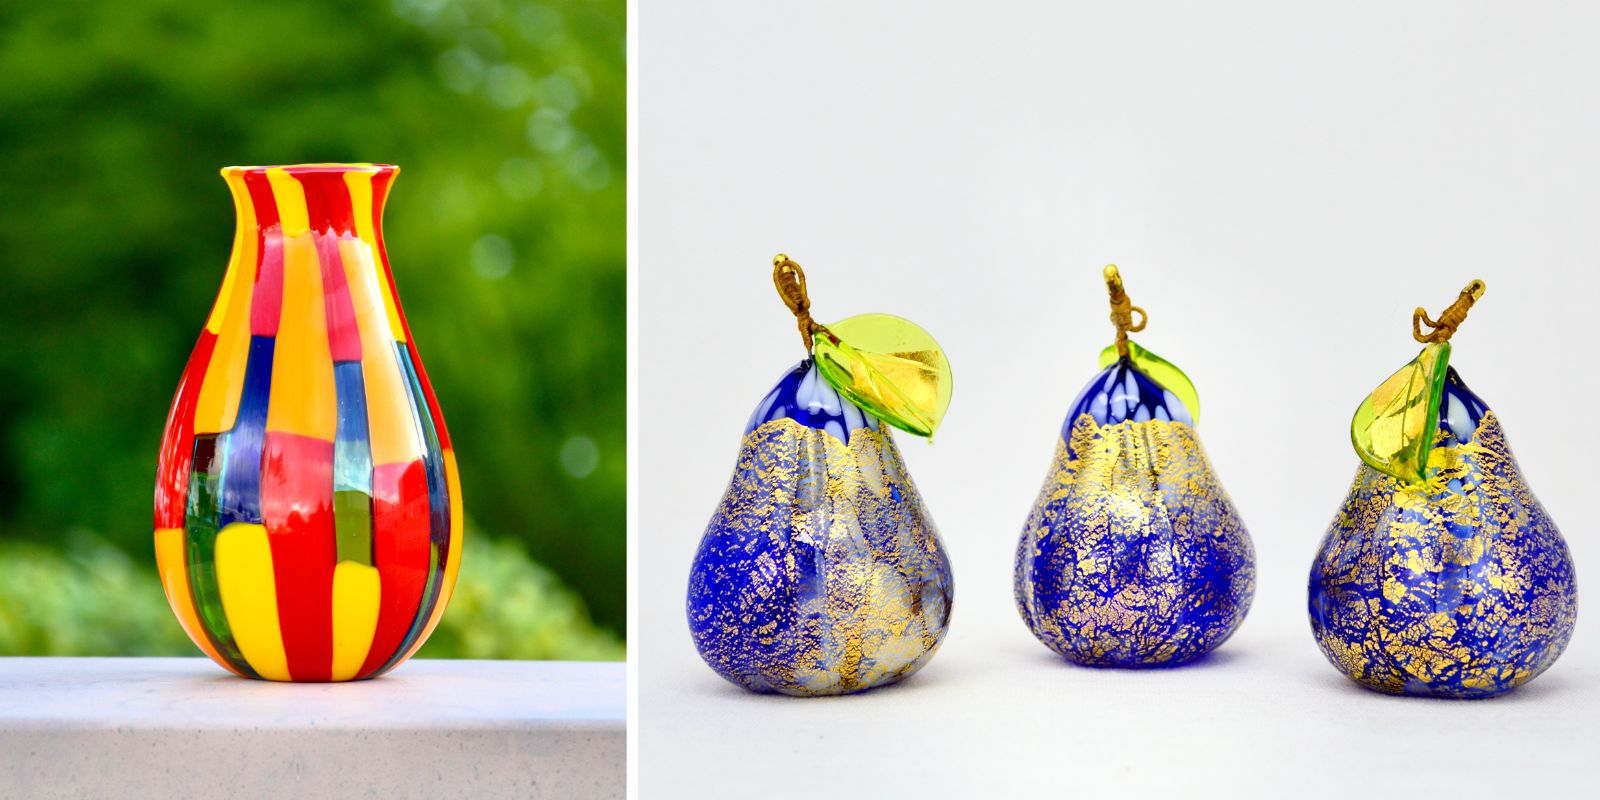 Murano Glass Vase and three glass pears in blue, all made in Italy by hand.